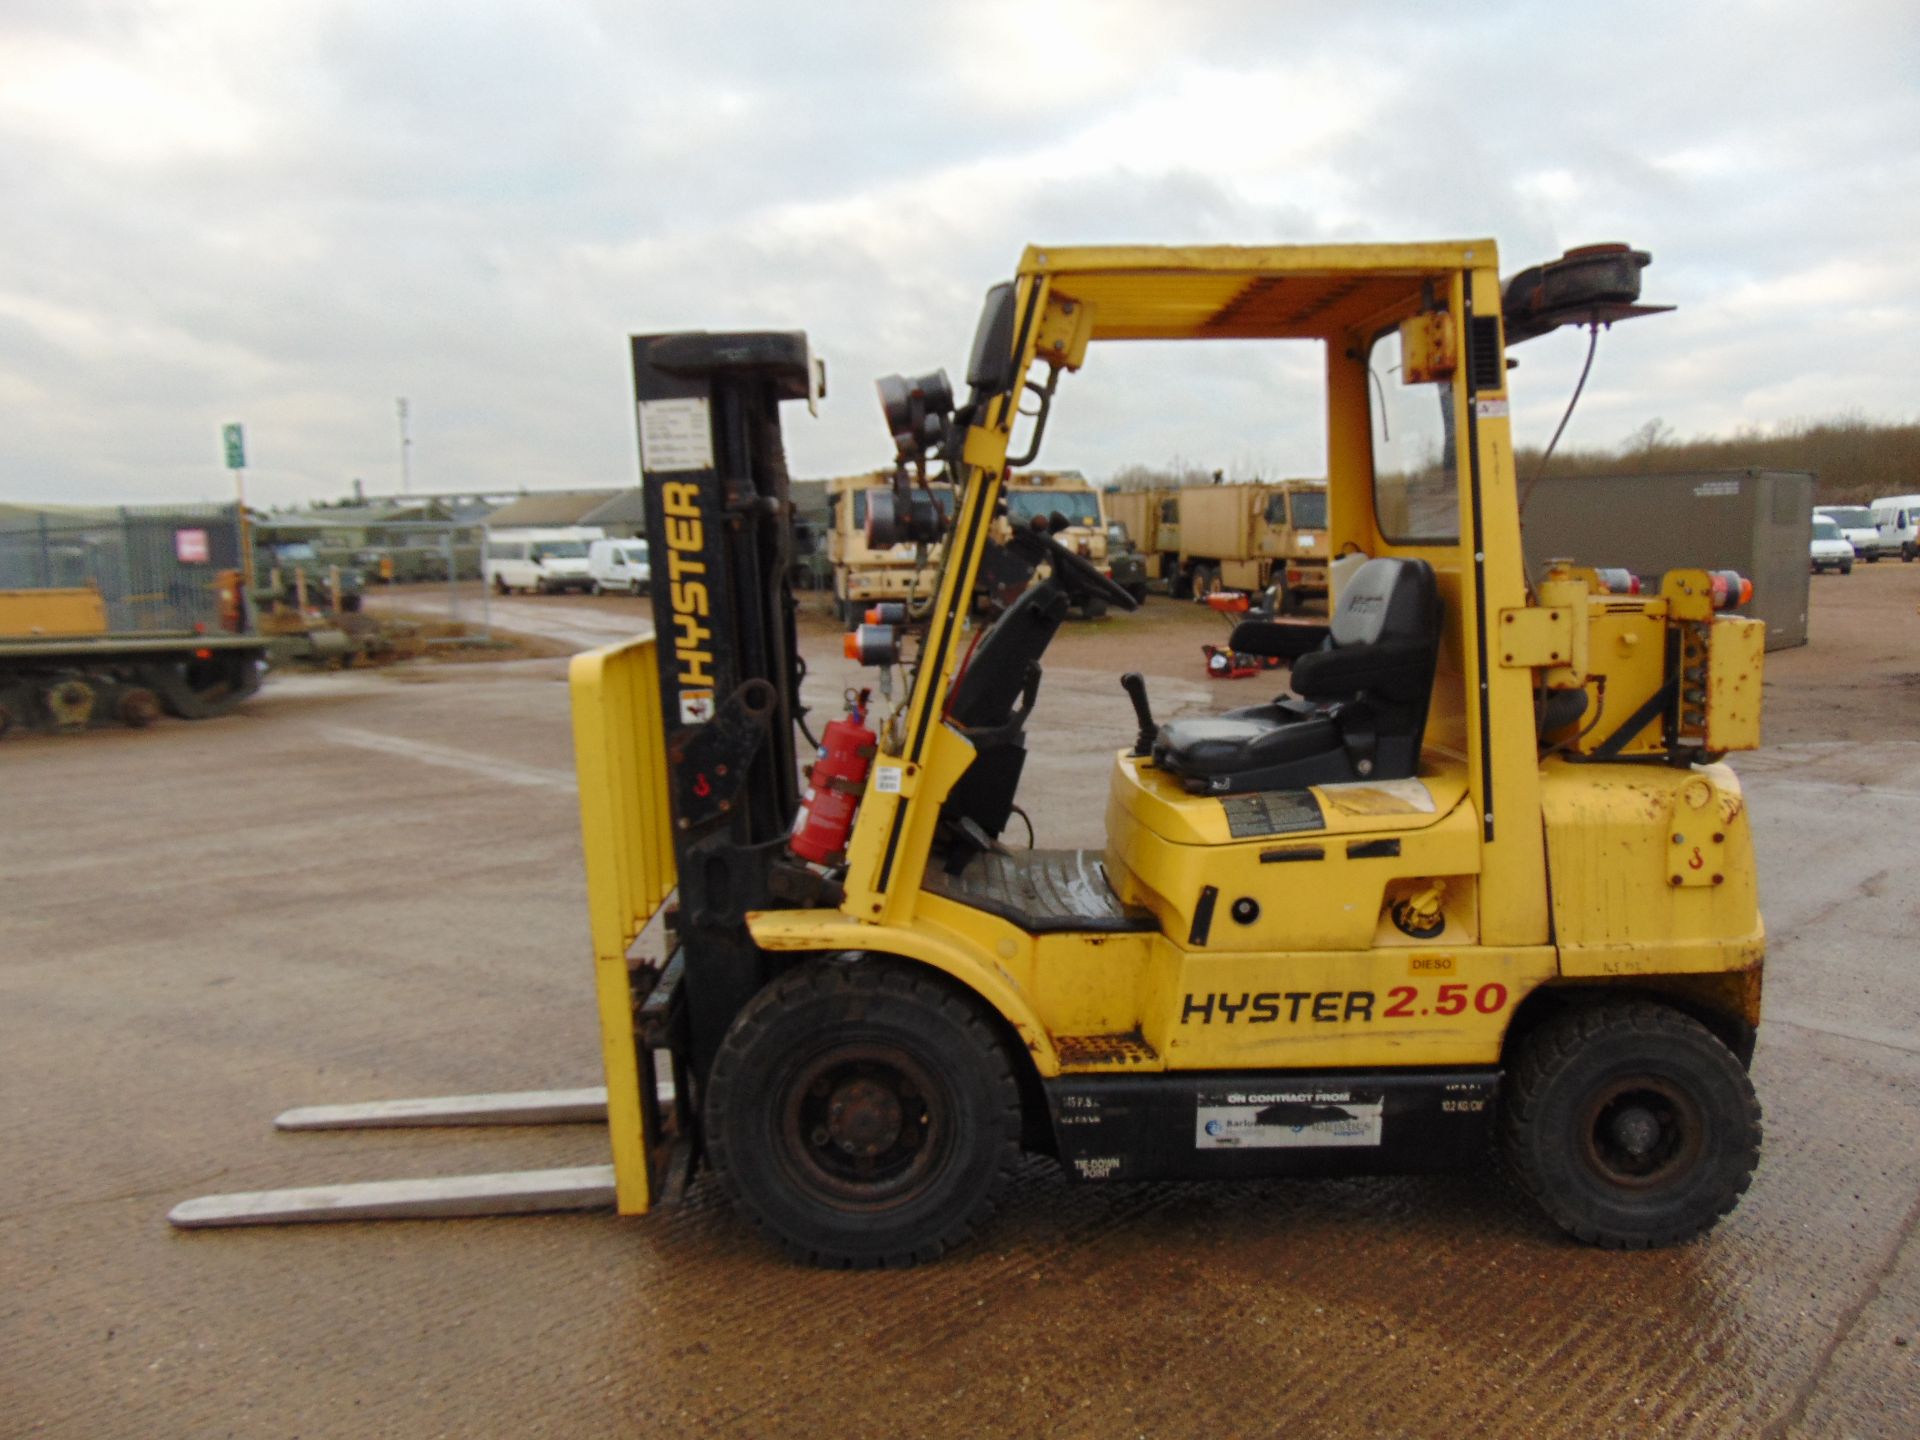 Hyster 2.50 Class C, Zone 2 Protected Diesel Forklift - Image 4 of 25